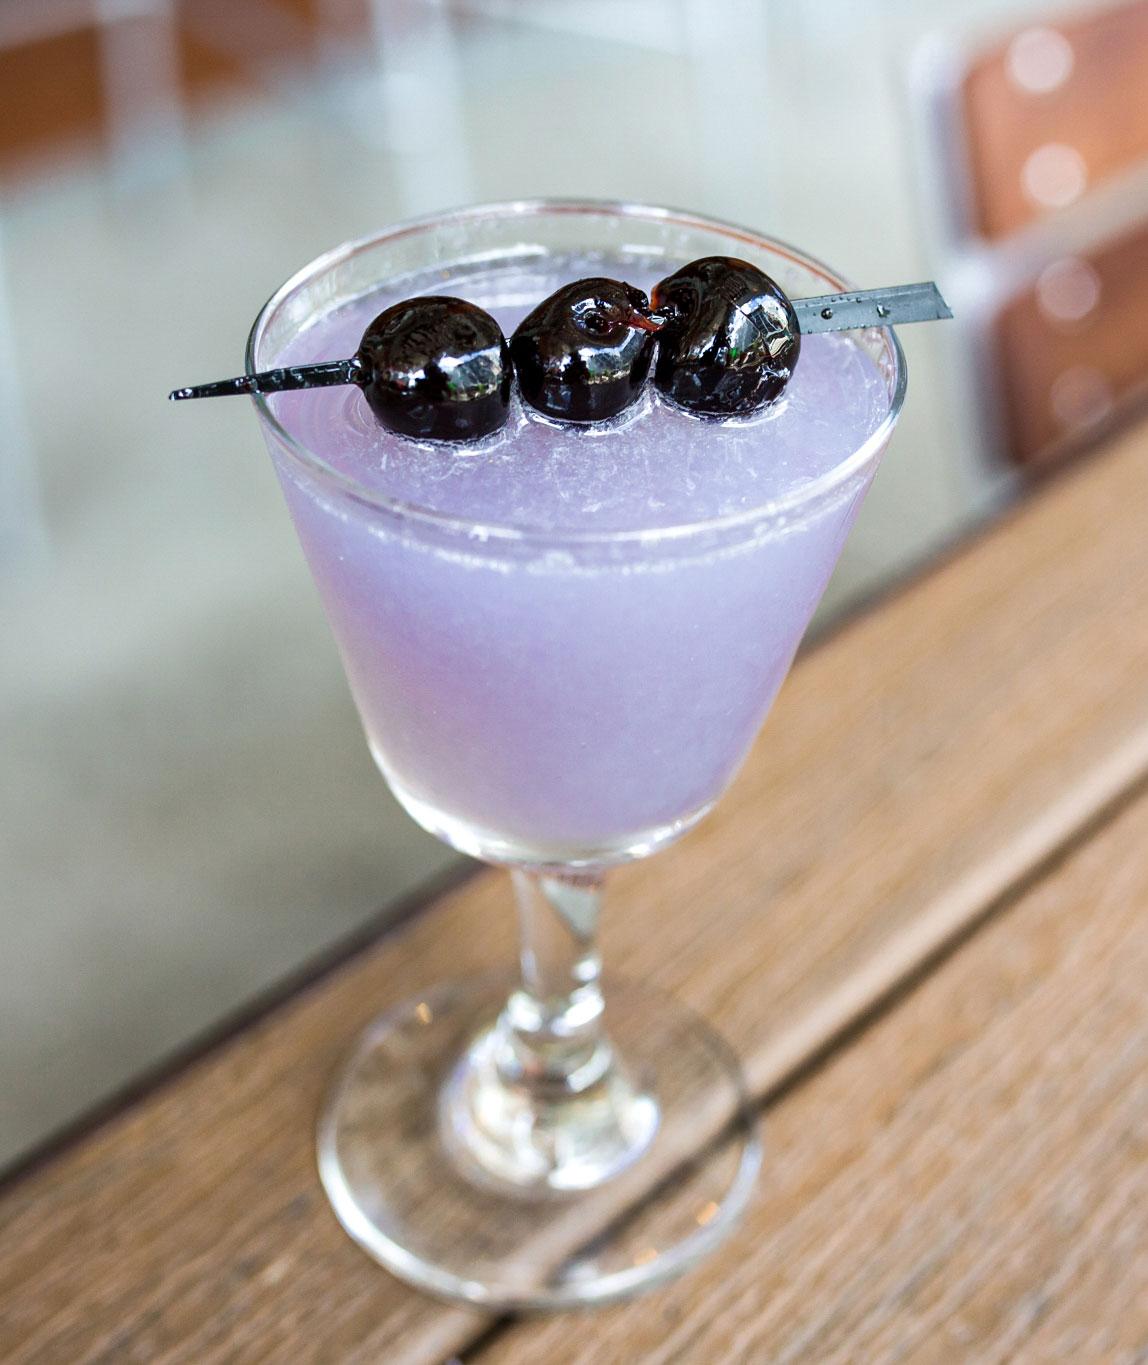 An example of the Aviation, the mixed drink (drink) featuring Hayman’s London Dry Gin, lemon juice, maraschino liqueur, and Rothman & Winter Crème de Violette; photo by Carolina Stamey, STIR, Chattanooga